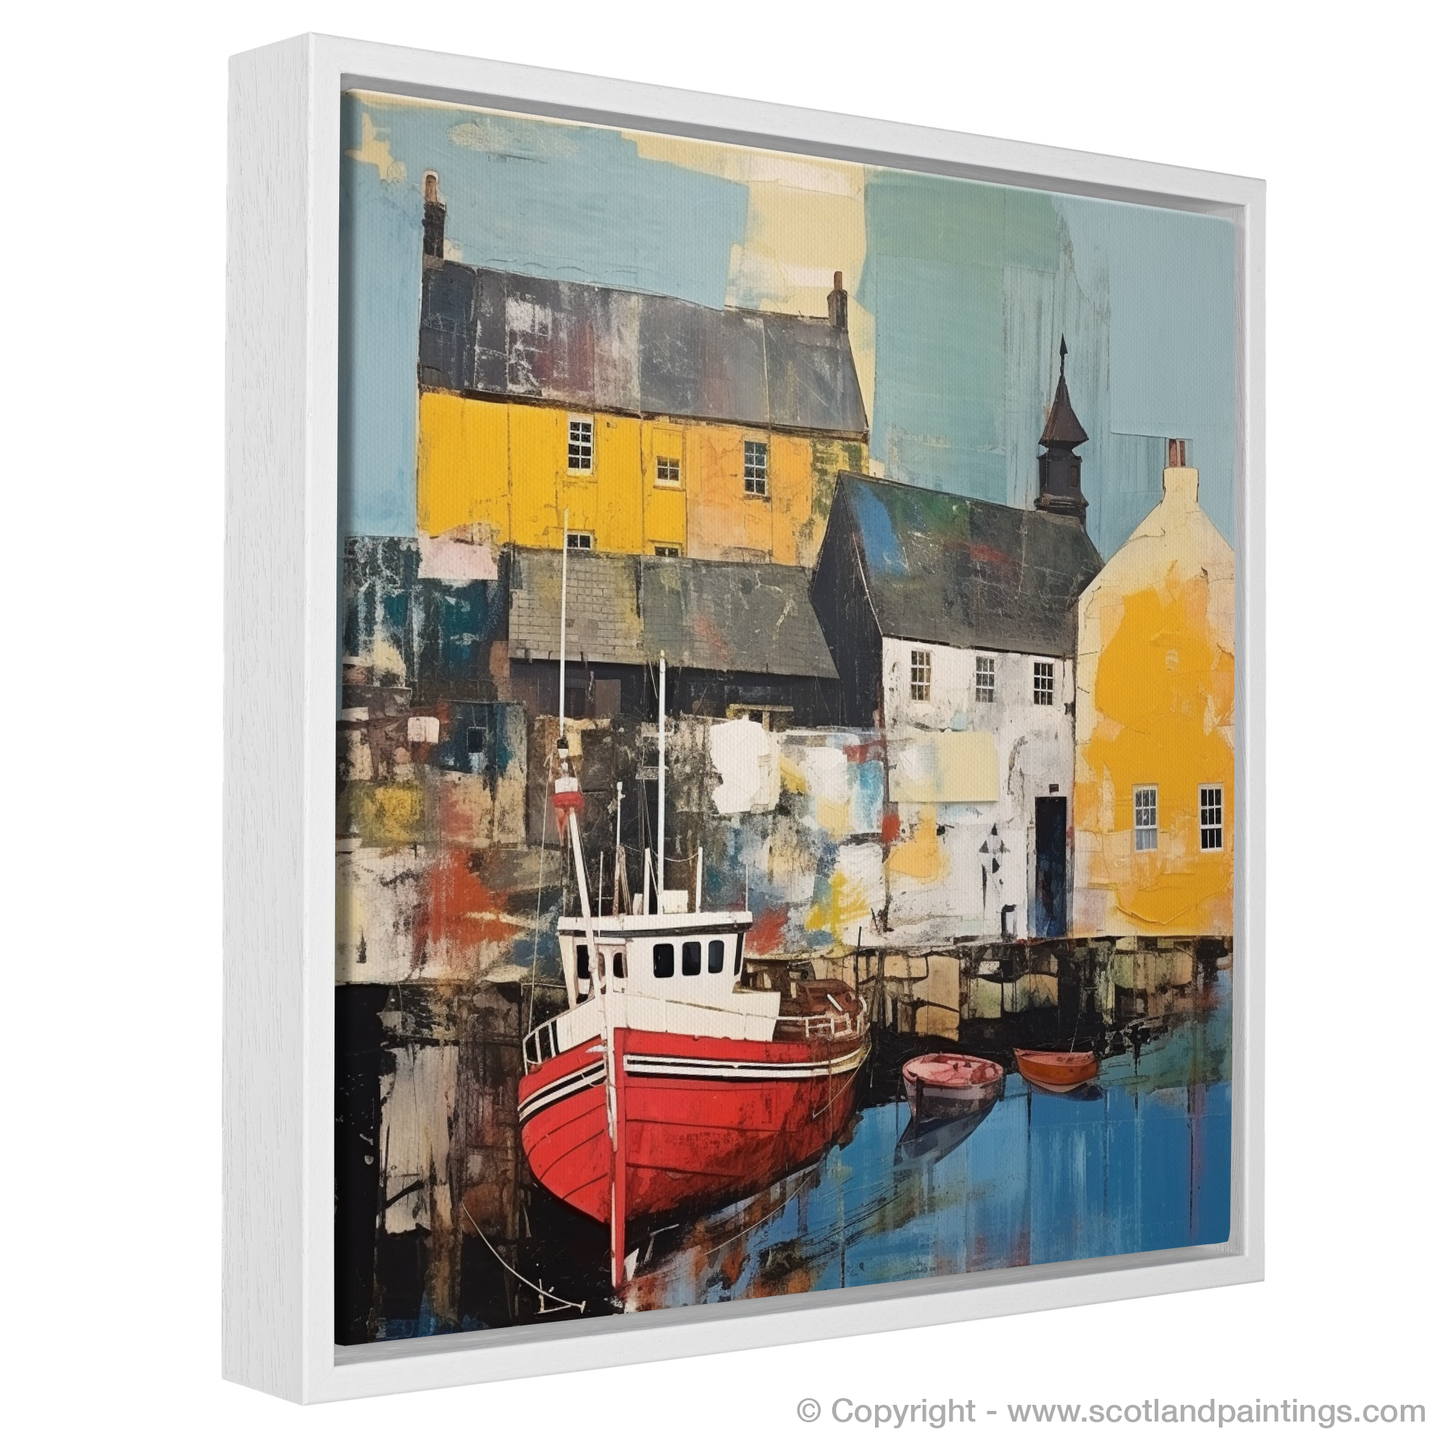 Electric Harbour: A Pop Art Tribute to Stornoway